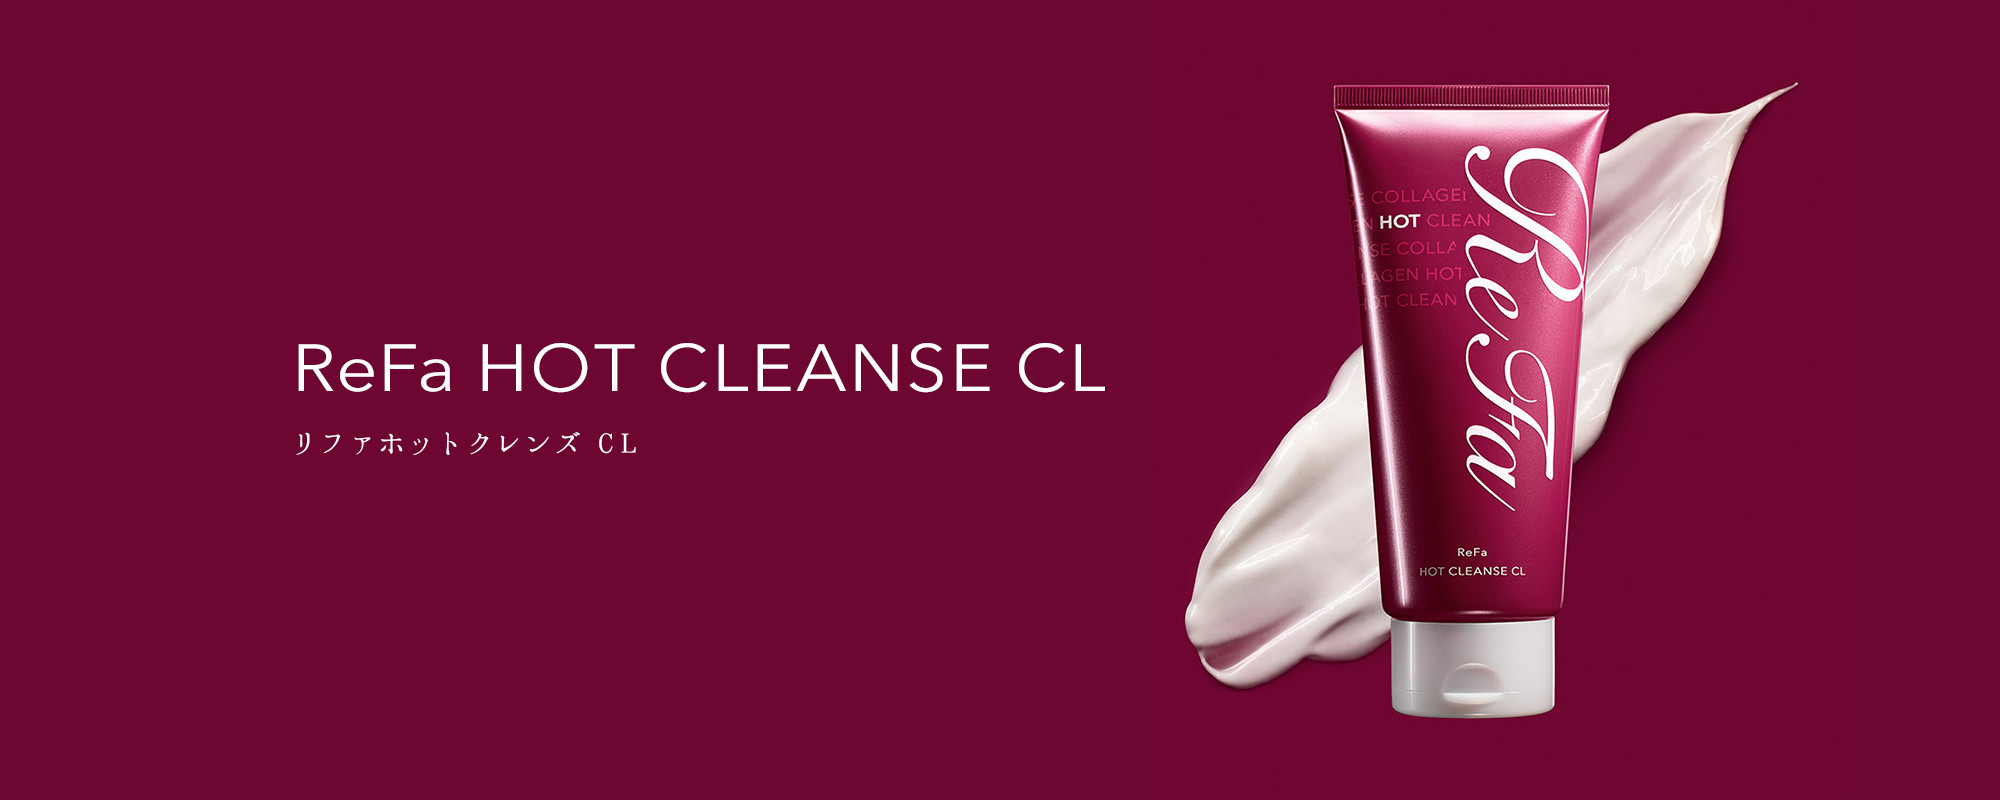 ReFa HOT CLEANSE CL（リファホットクレンズ CL）